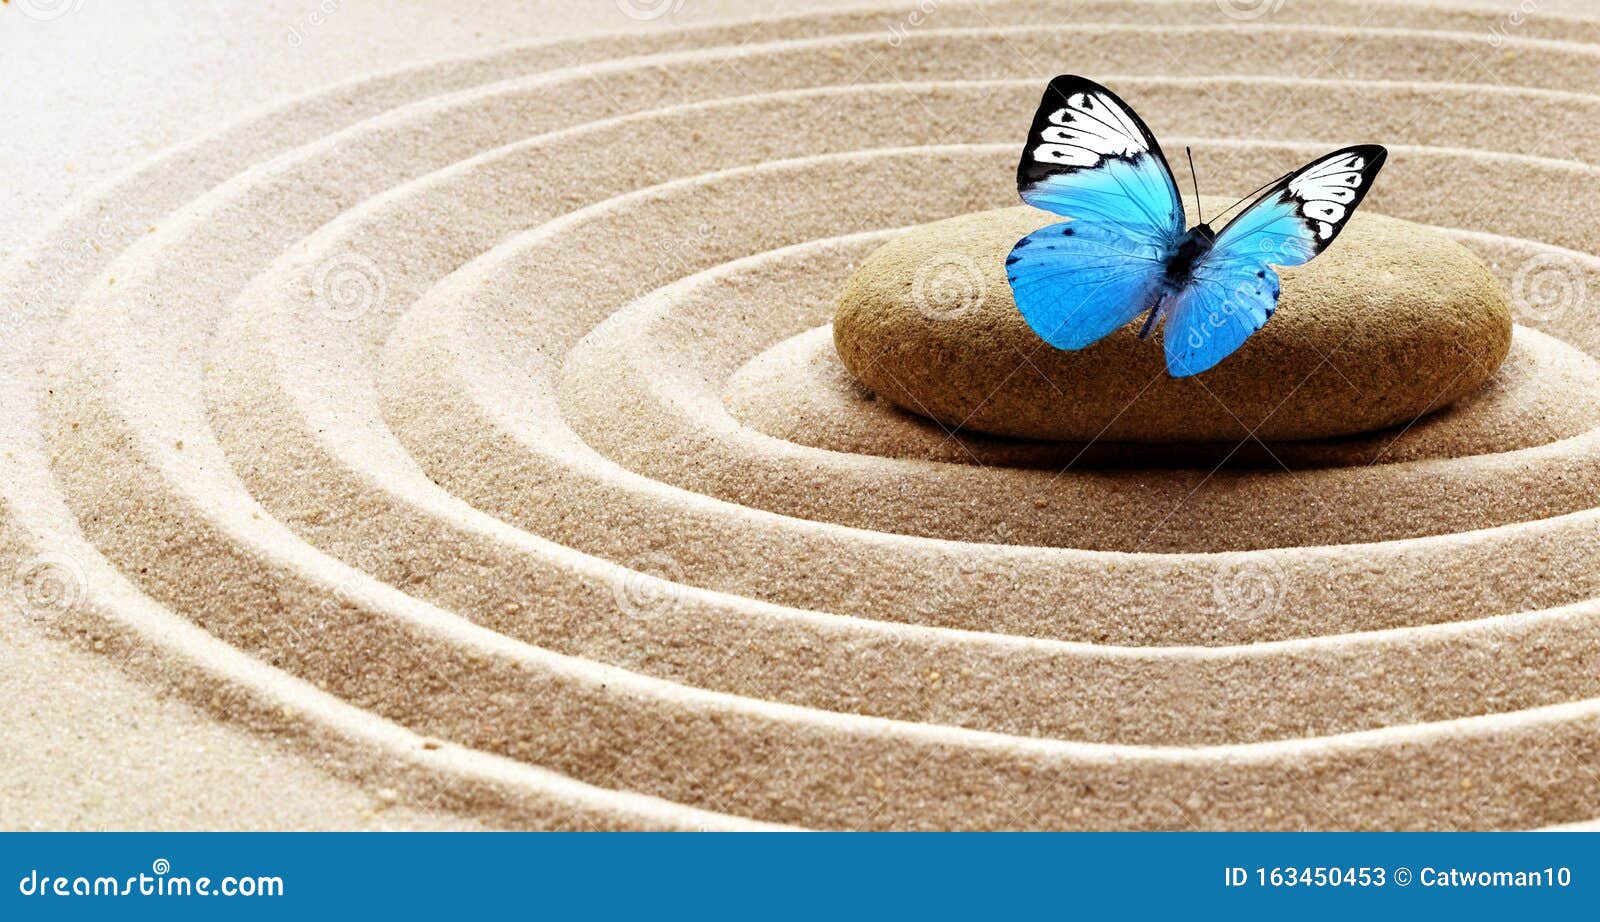 zen garden meditation stone background and butterfly with stones and lines in sand for relaxation balance and harmony spirituality